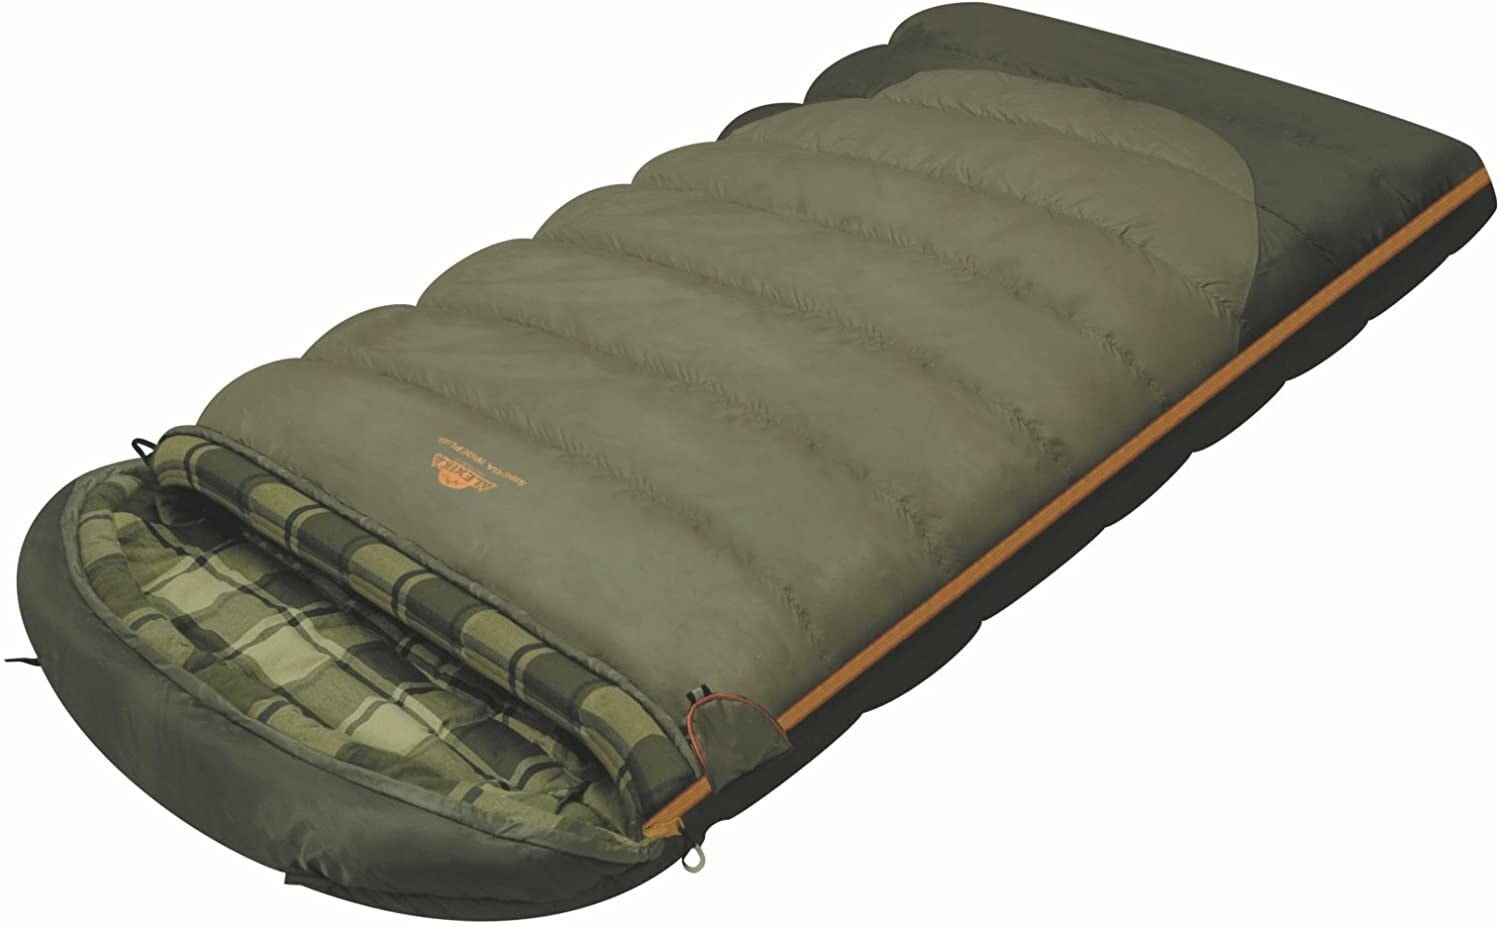 Alexika Siberia Wide Plus Sleeping Bag / Warm, Spacious, Rectangular 3-Season Sleeping Bag for Adults and Families / for Outdoor Camping in Low Temperatures down to 0 °C / 230 x100 cm